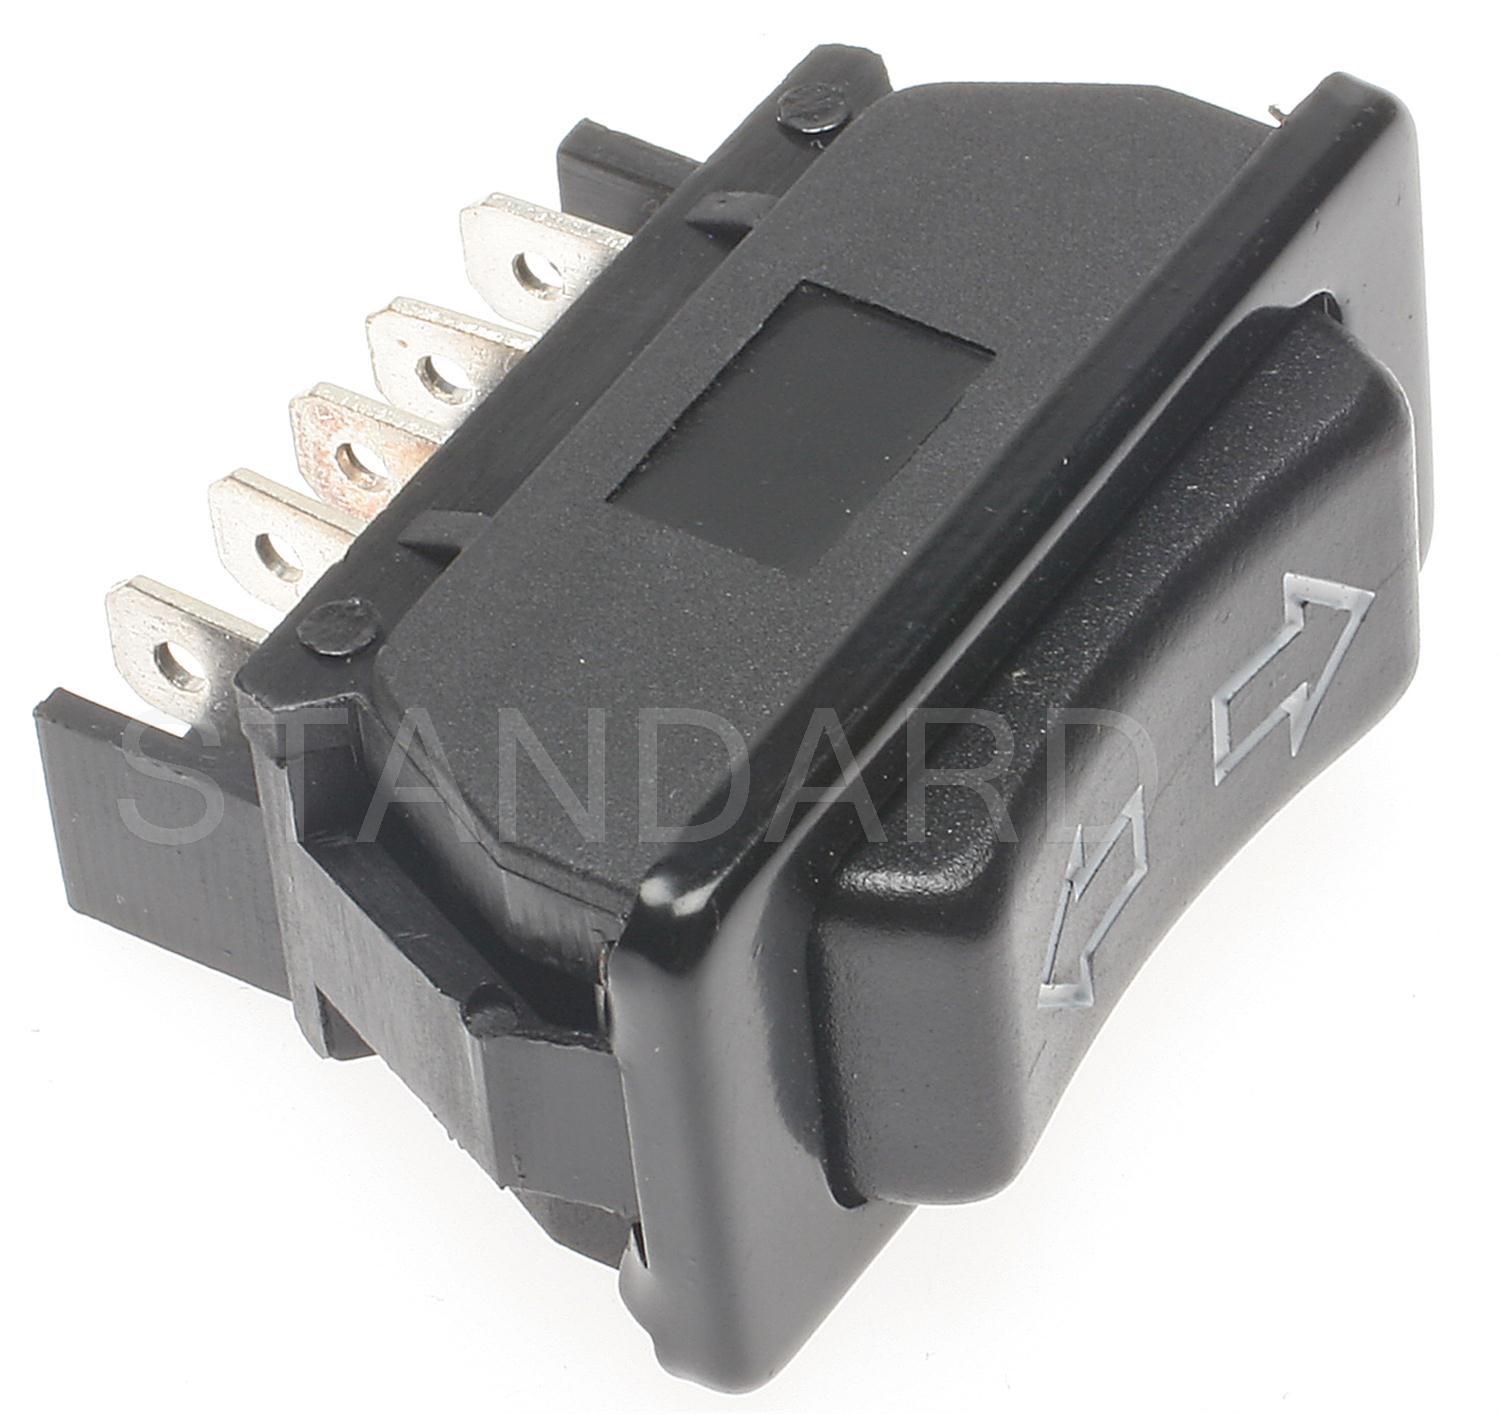 Picture of Standard Motor Products DS1338 Multi Purpose Switch